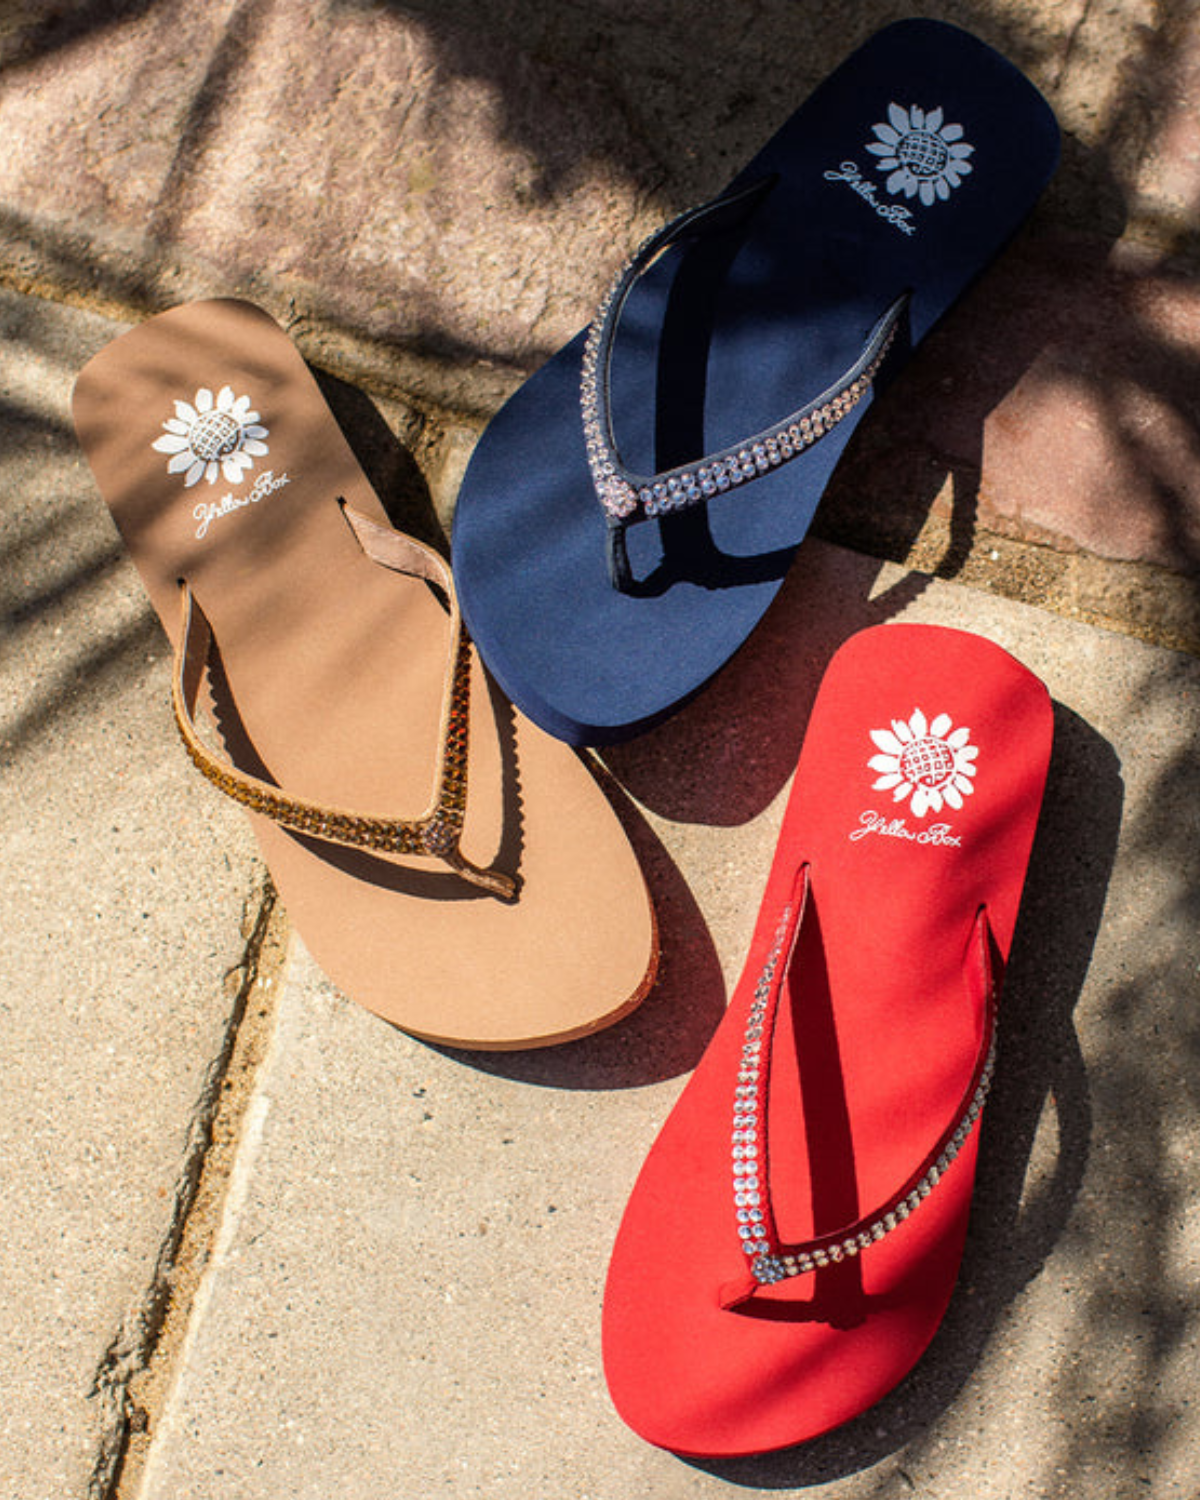 A group of women's multi colored wedge sandals with rhinestones on the strap. From left to right it shows taupe, navy, and red.